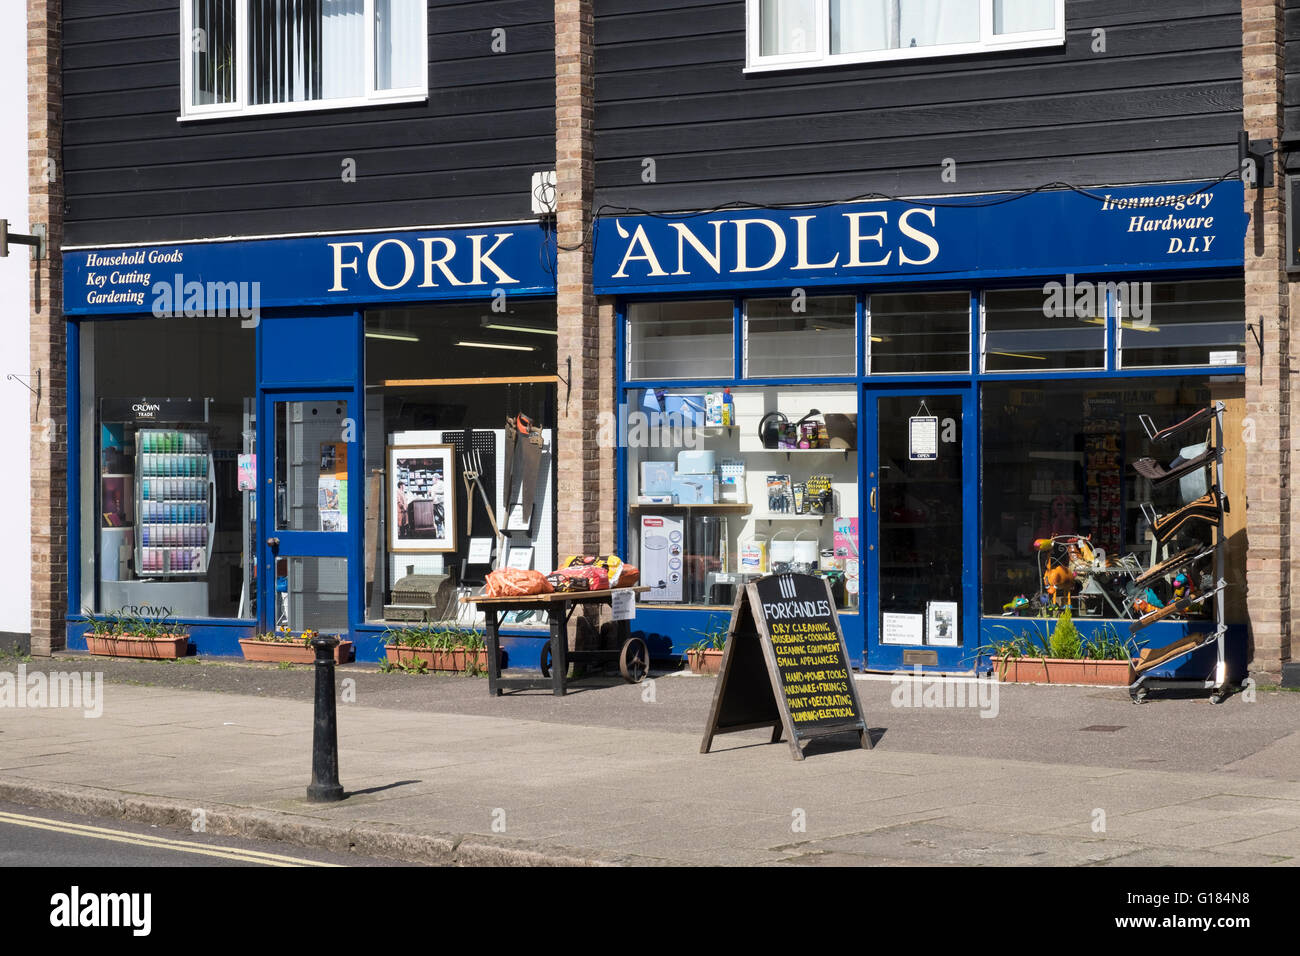 Fork Andles ironmongery shop, in homage to The Two Ronnies sketch from the 1970s tv show, Coggeshall, Essex, UK. Stock Photo